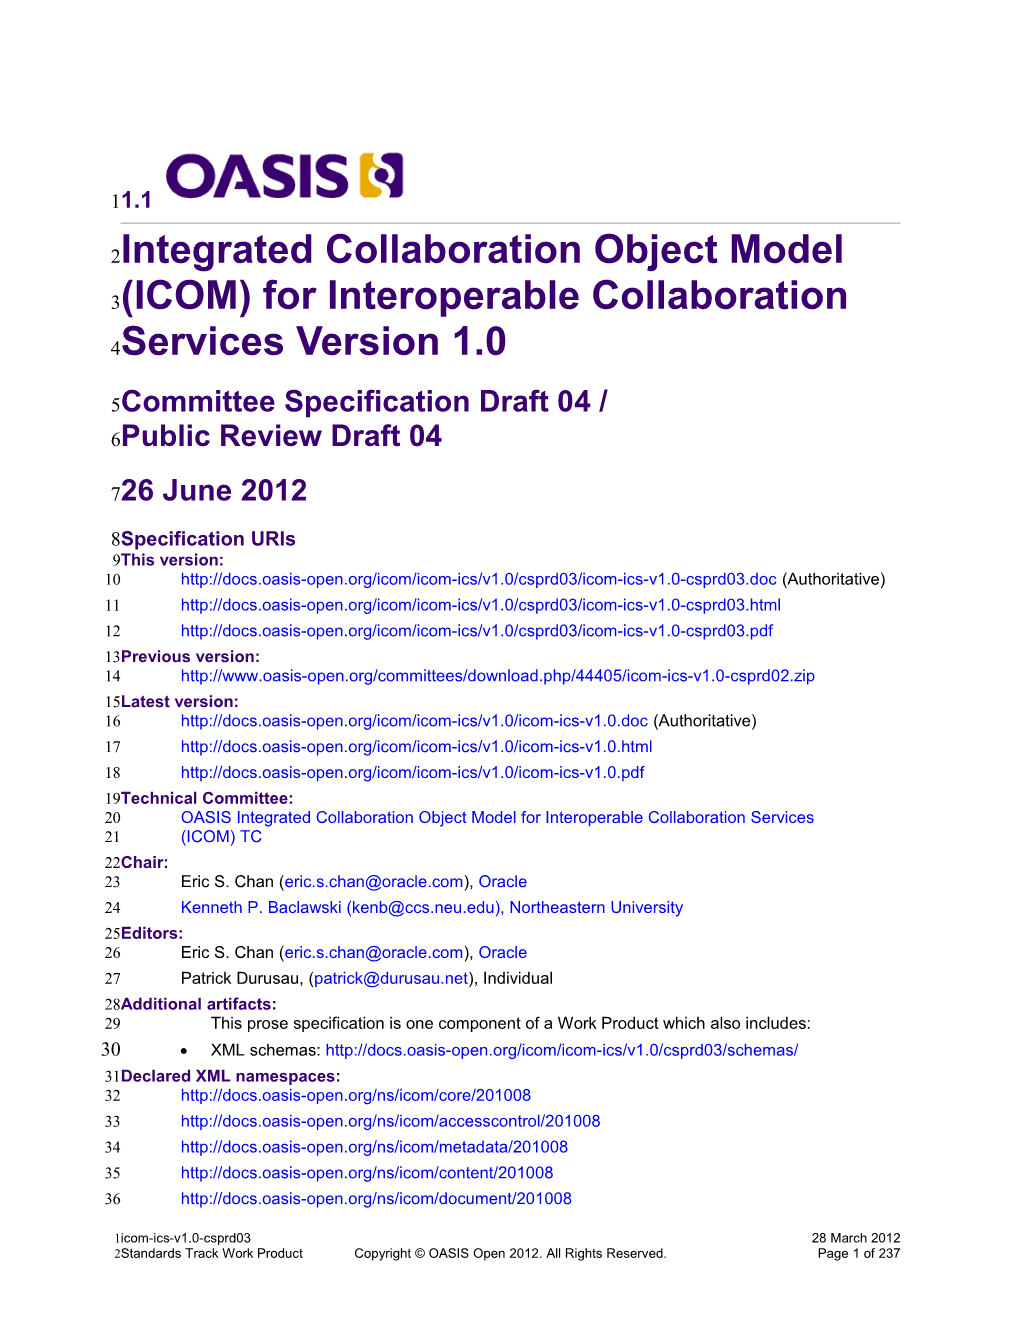 Integrated Collaboration Object Model (ICOM) for Interoperable Collaboration Services Version